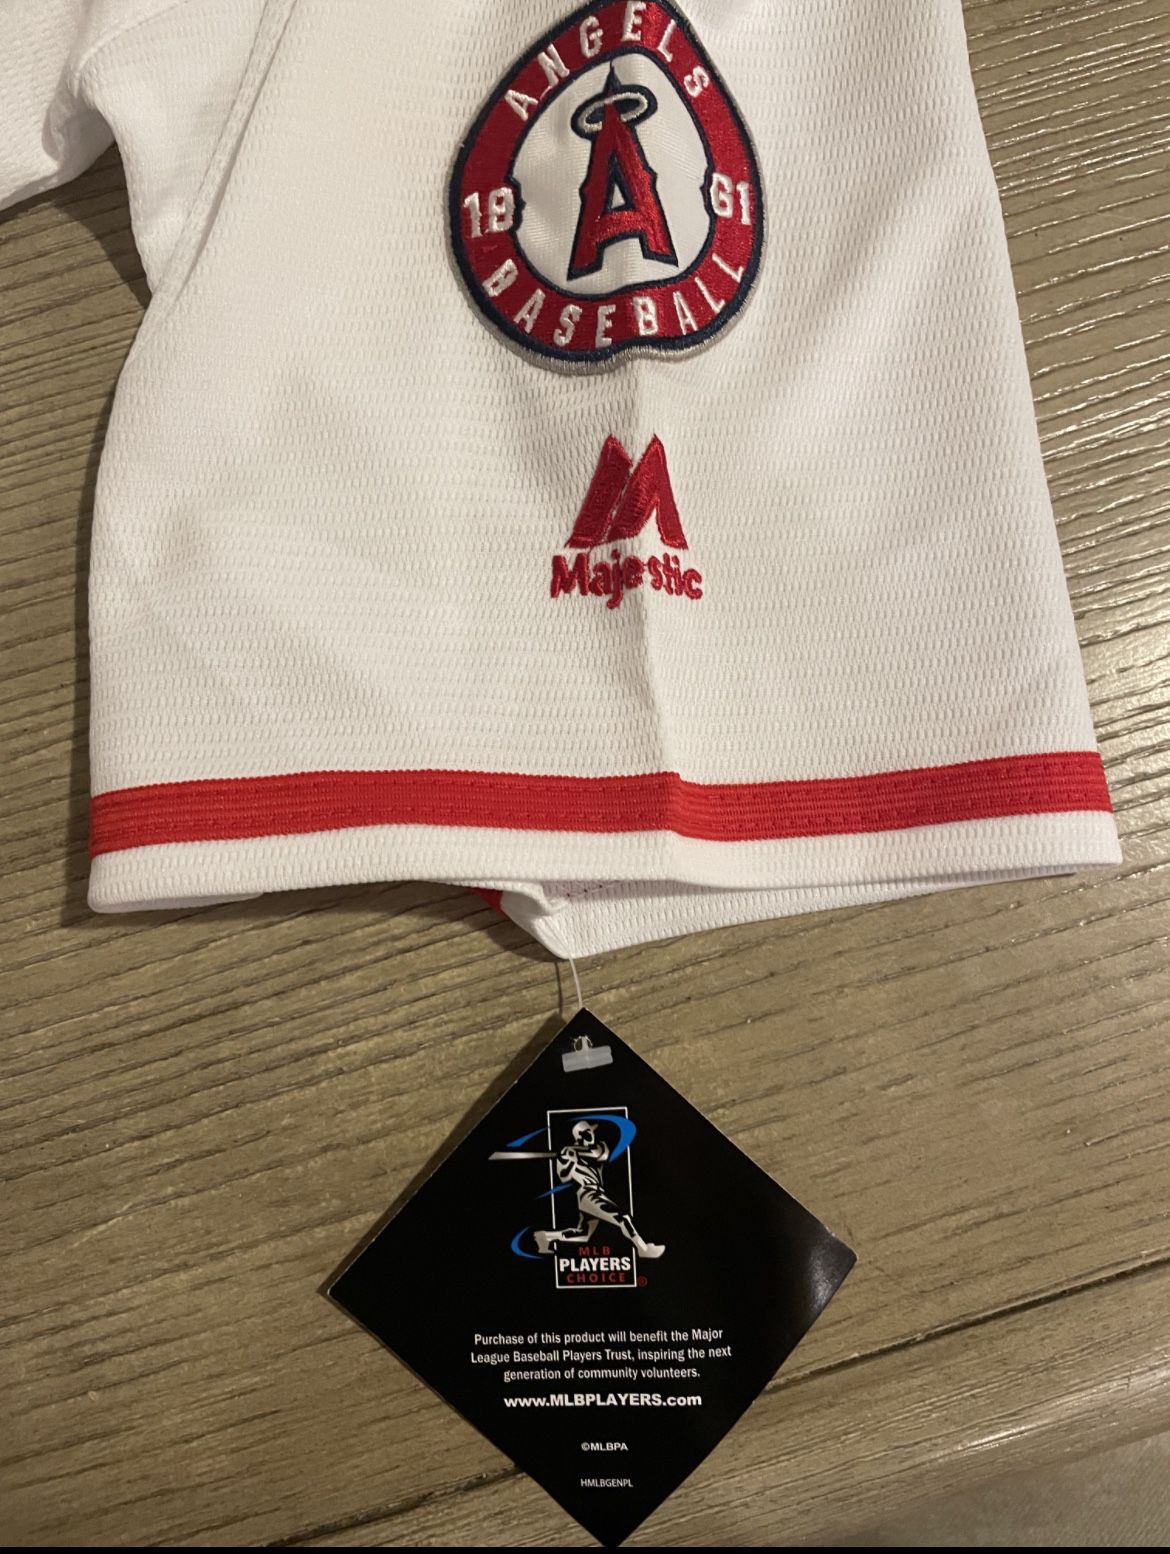 *NEW* Shohei Ohtani Jersey (Kanji) - City Connect - #17 Angels - Women's  for Sale in Irvine, CA - OfferUp